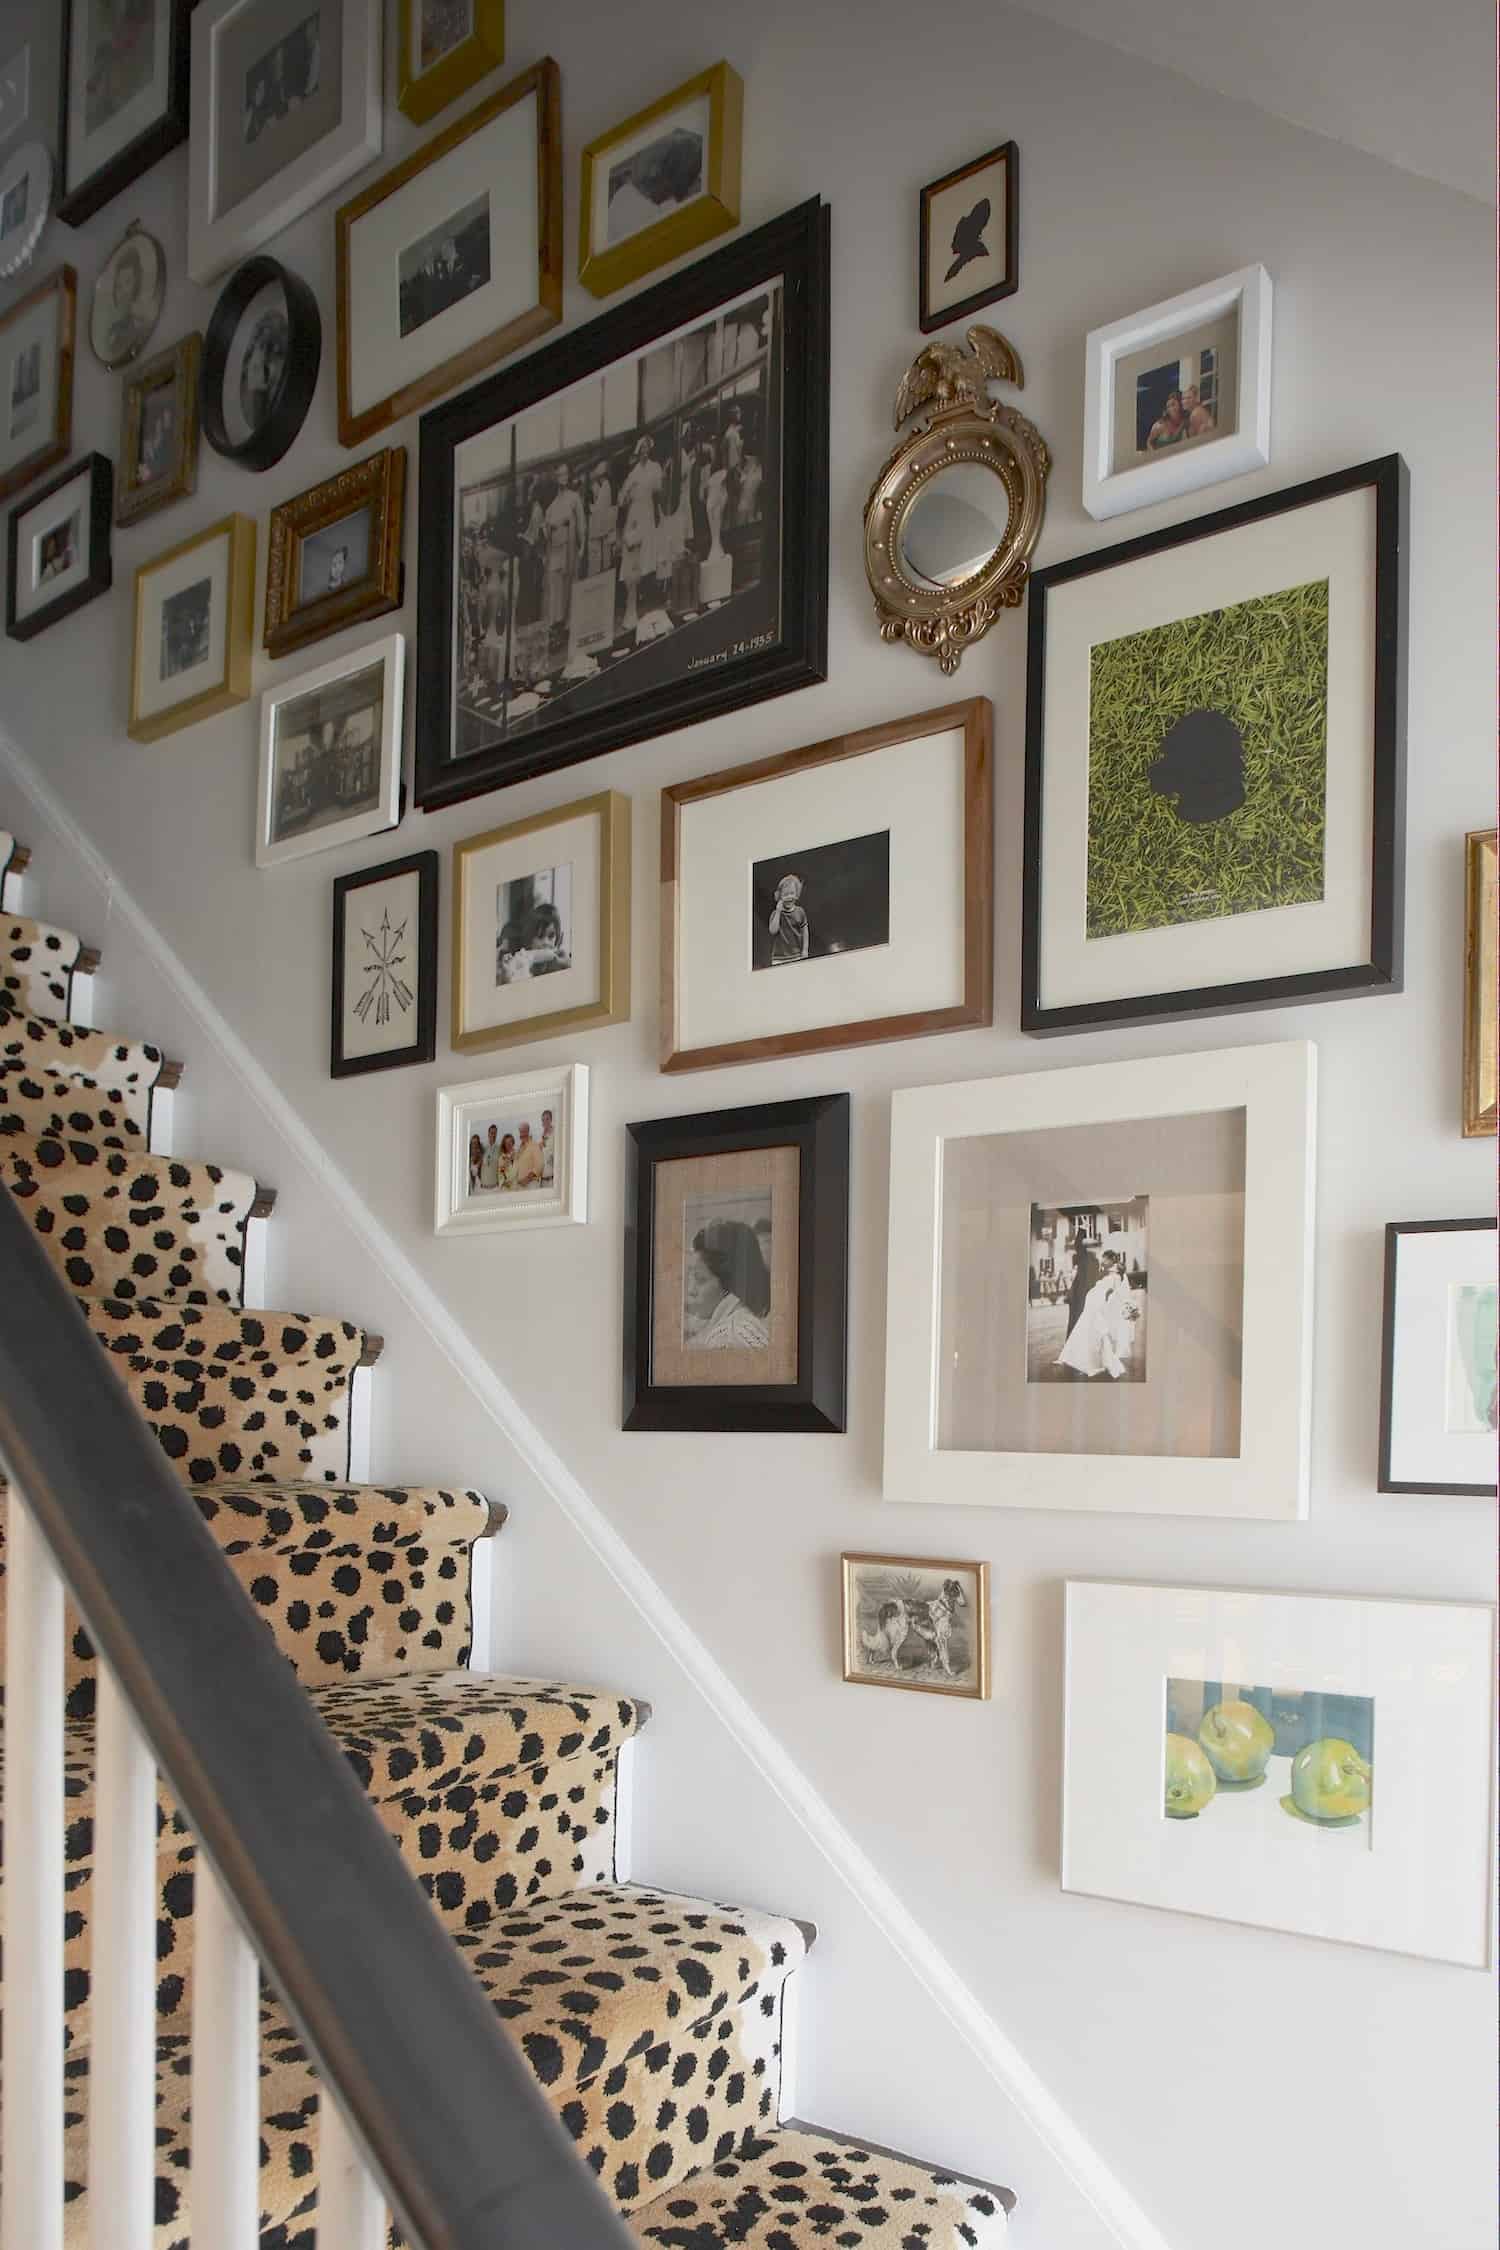 Stairwells are a great place to display your family photos and other decor that adds a lot of character in a tasteful way your home will love you for.